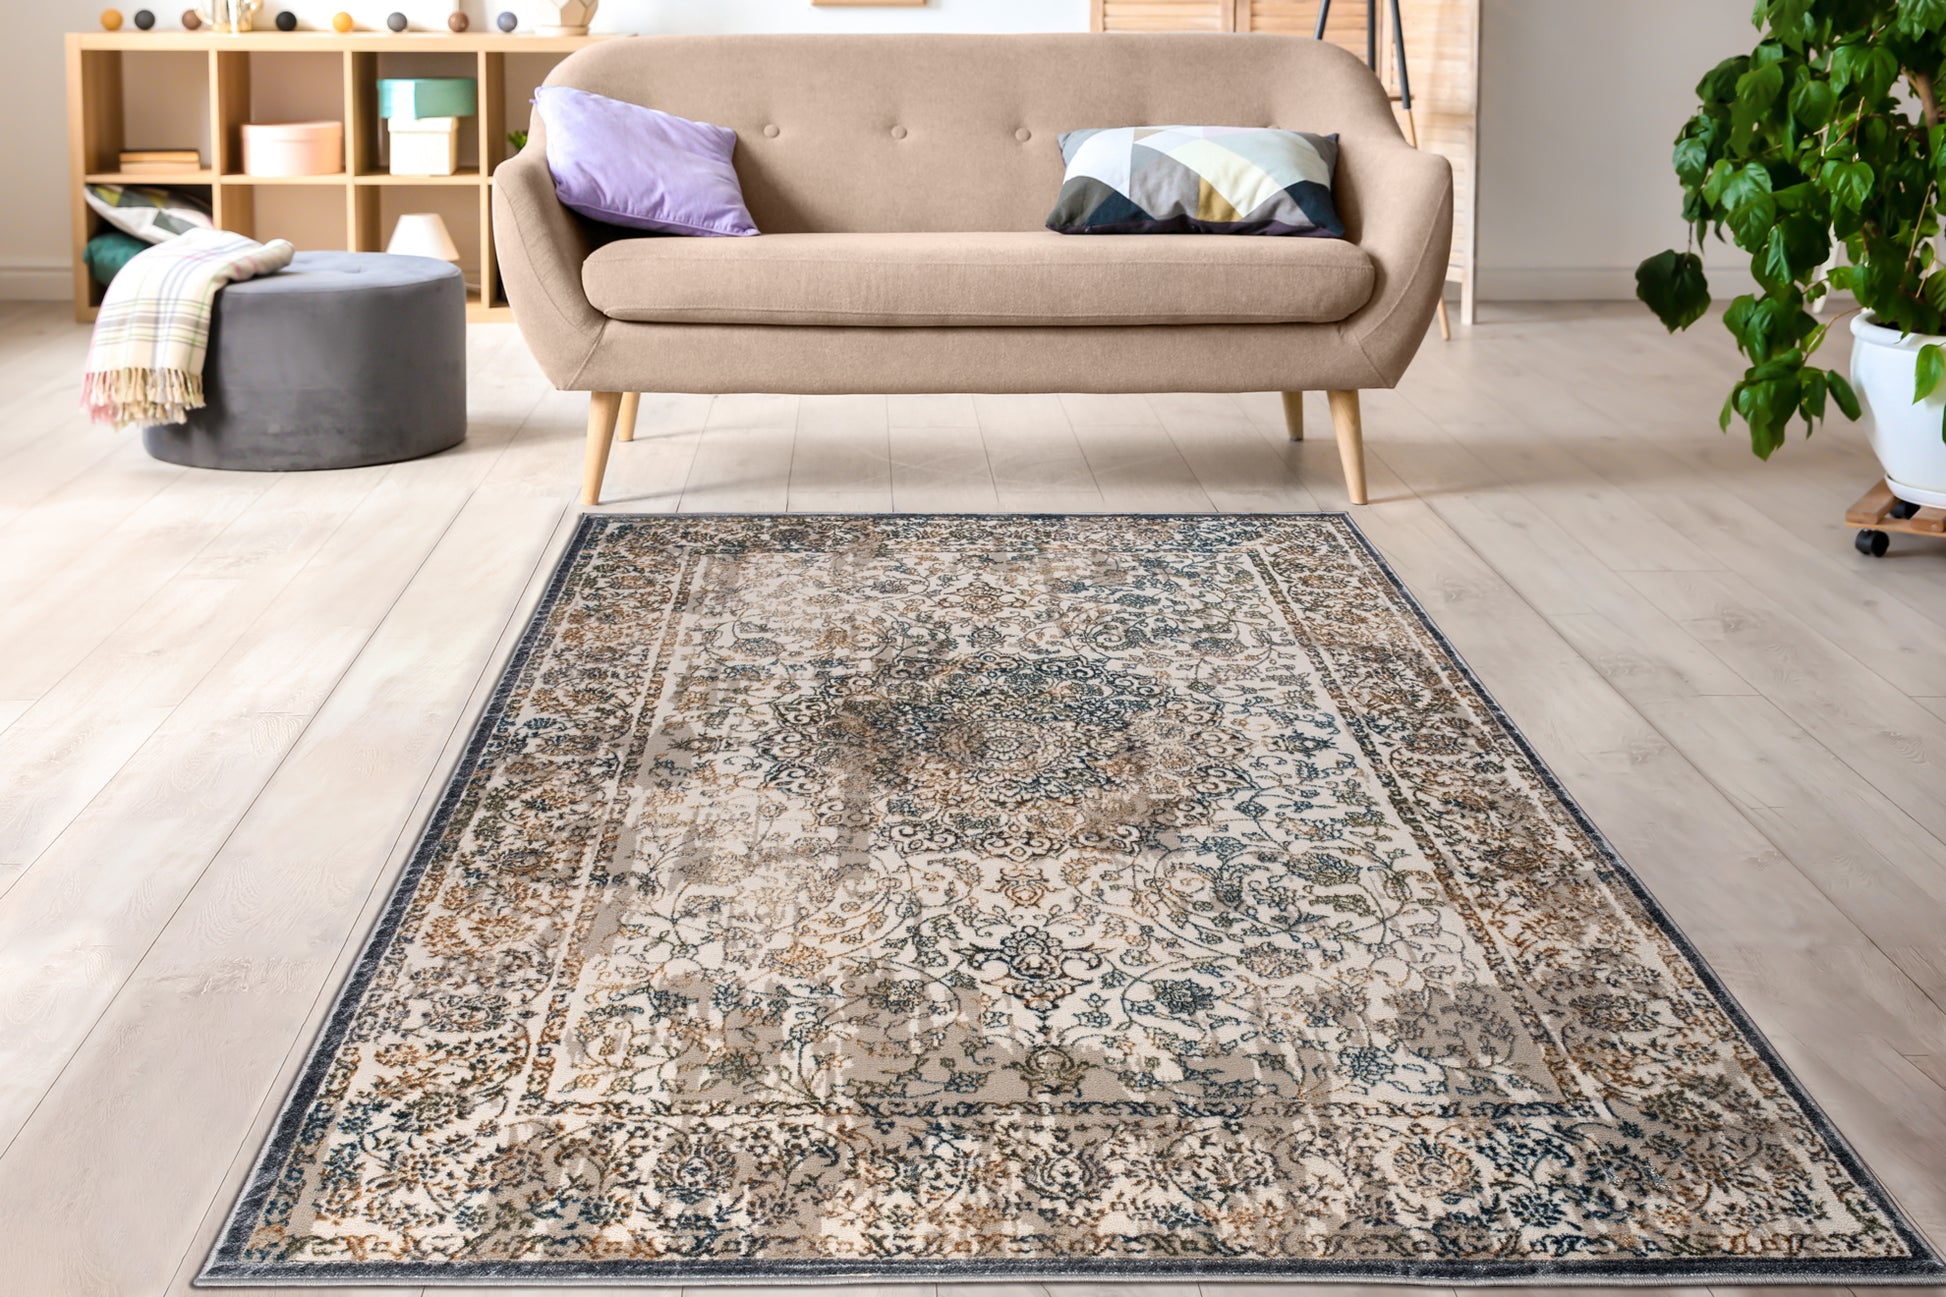 beige brown blue metalic traditional persian oriental contemporary area rug 4x6, 4x5 ft Small Carpet, Home Office, Living Room, Bedroom